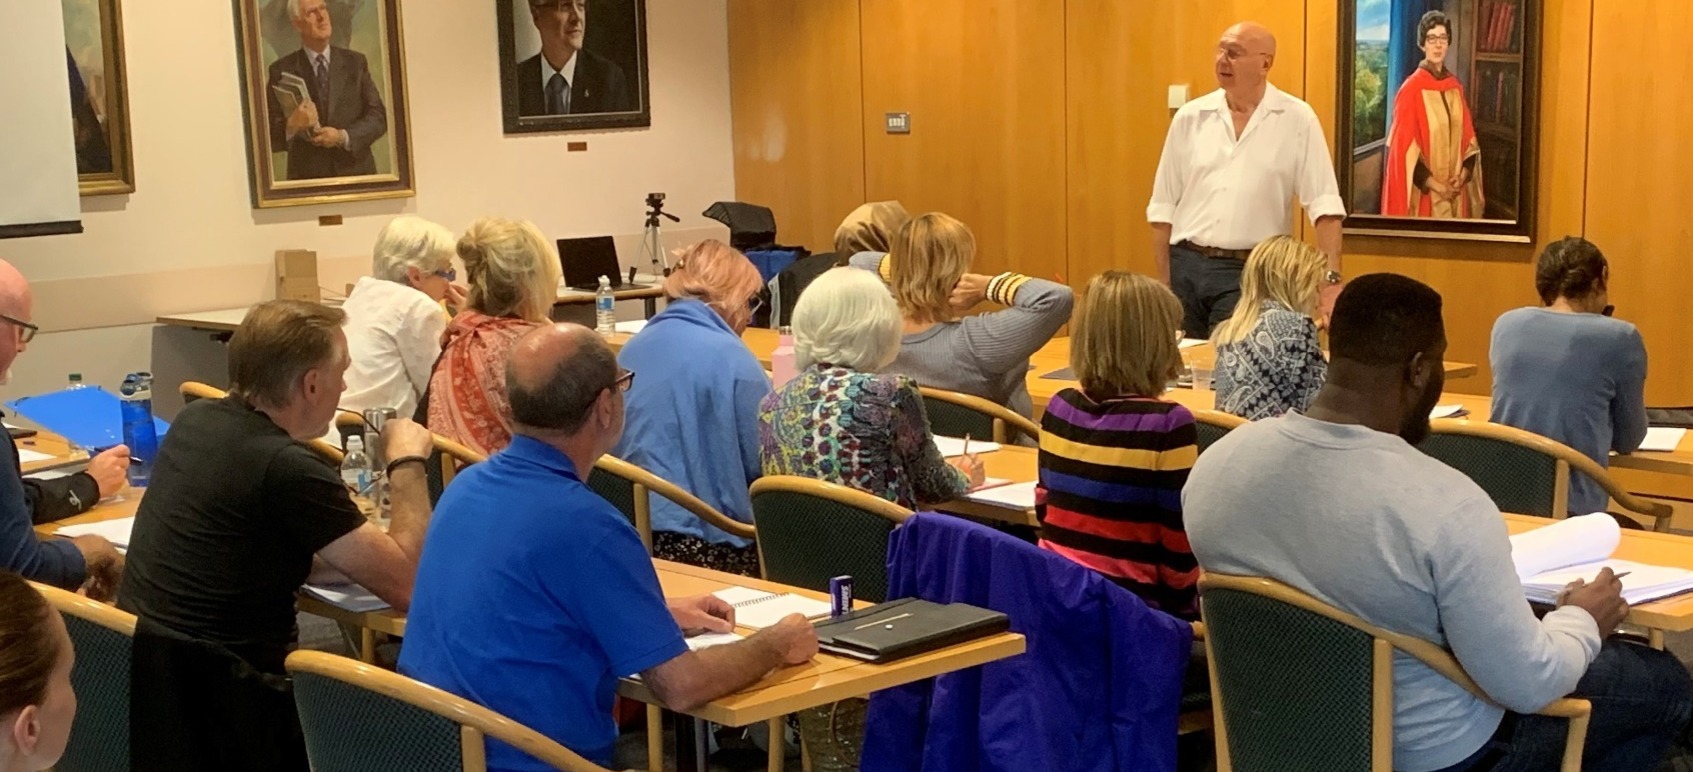 Hypnotherapy Training Class At The University Of Surrey